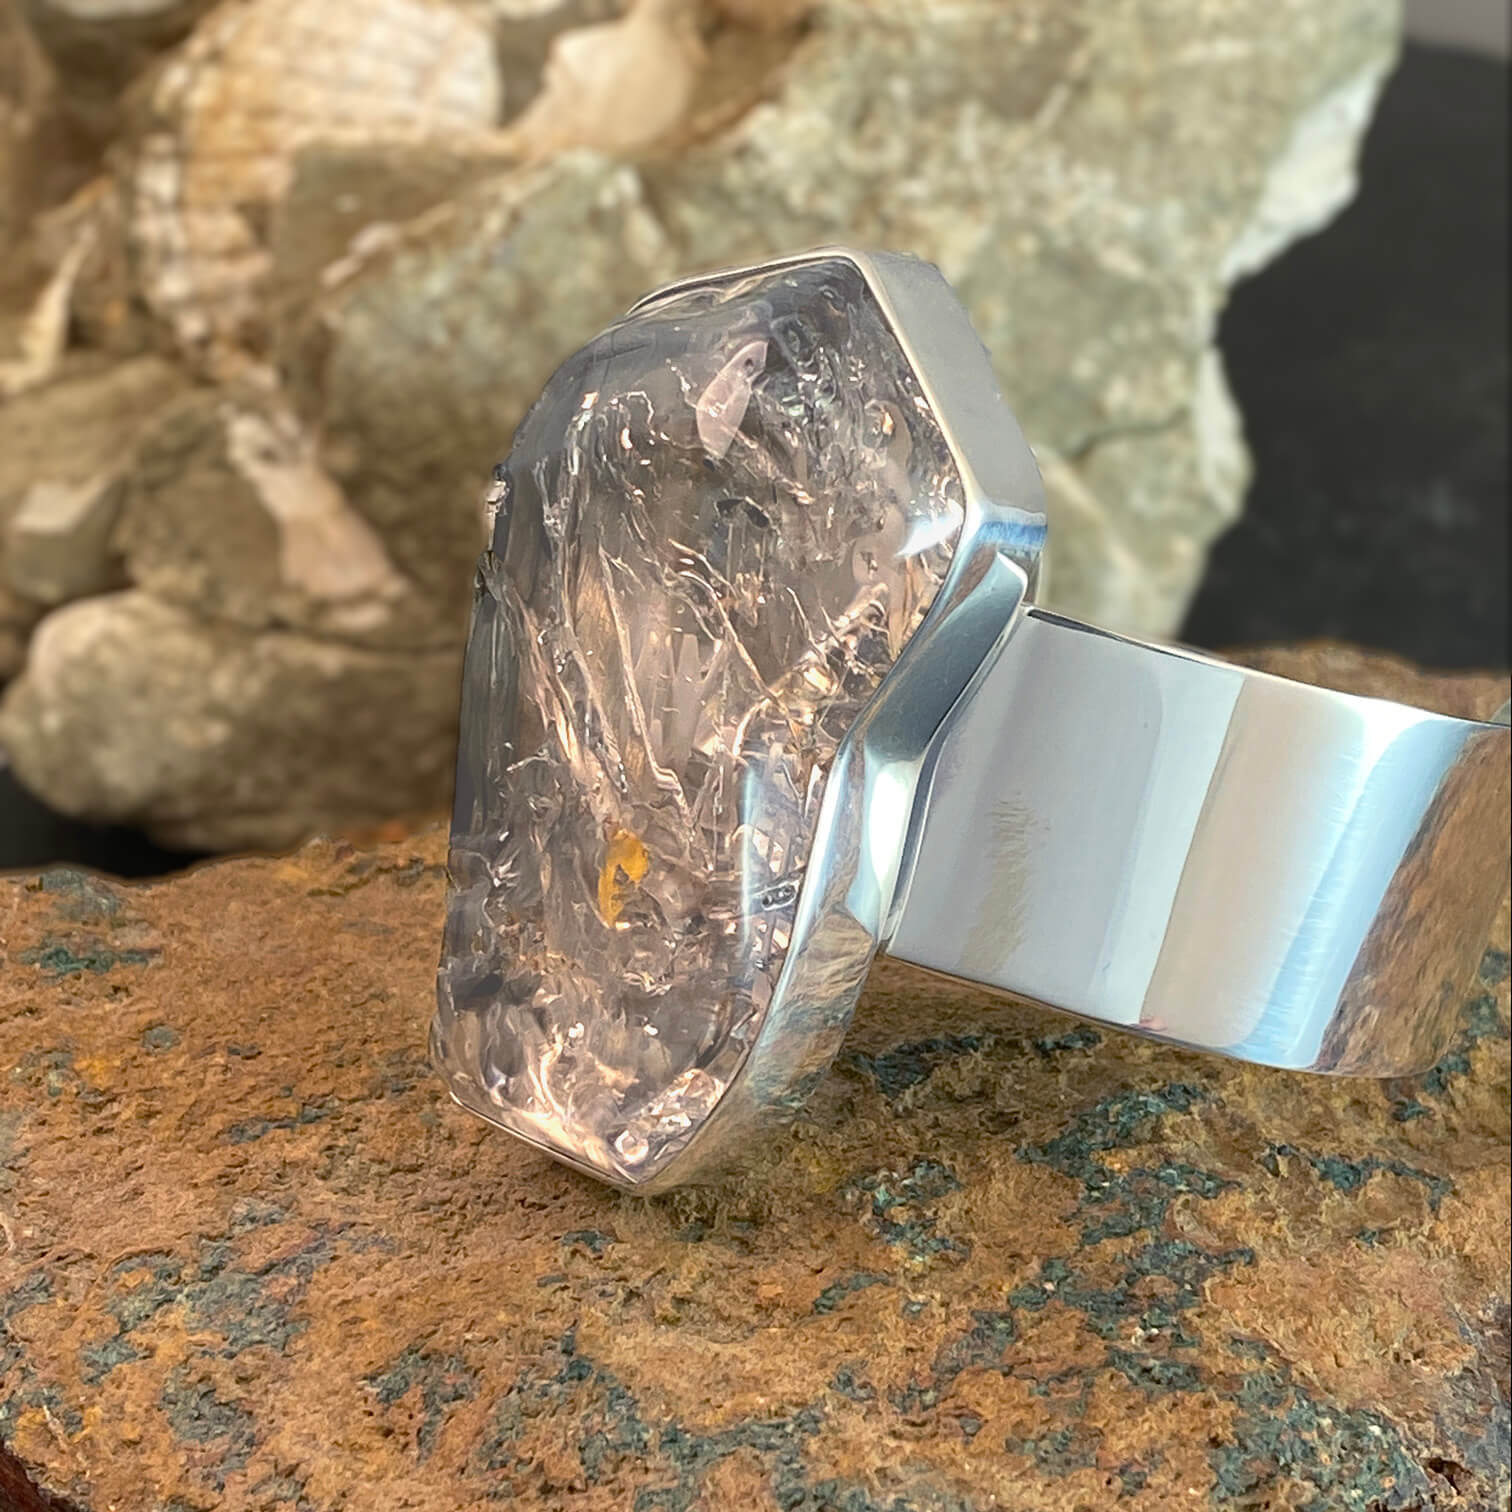 Smoky Elestial Sterling Silver Cuff Bracelet with Divine Feminine and Sacred Masculine Symbols